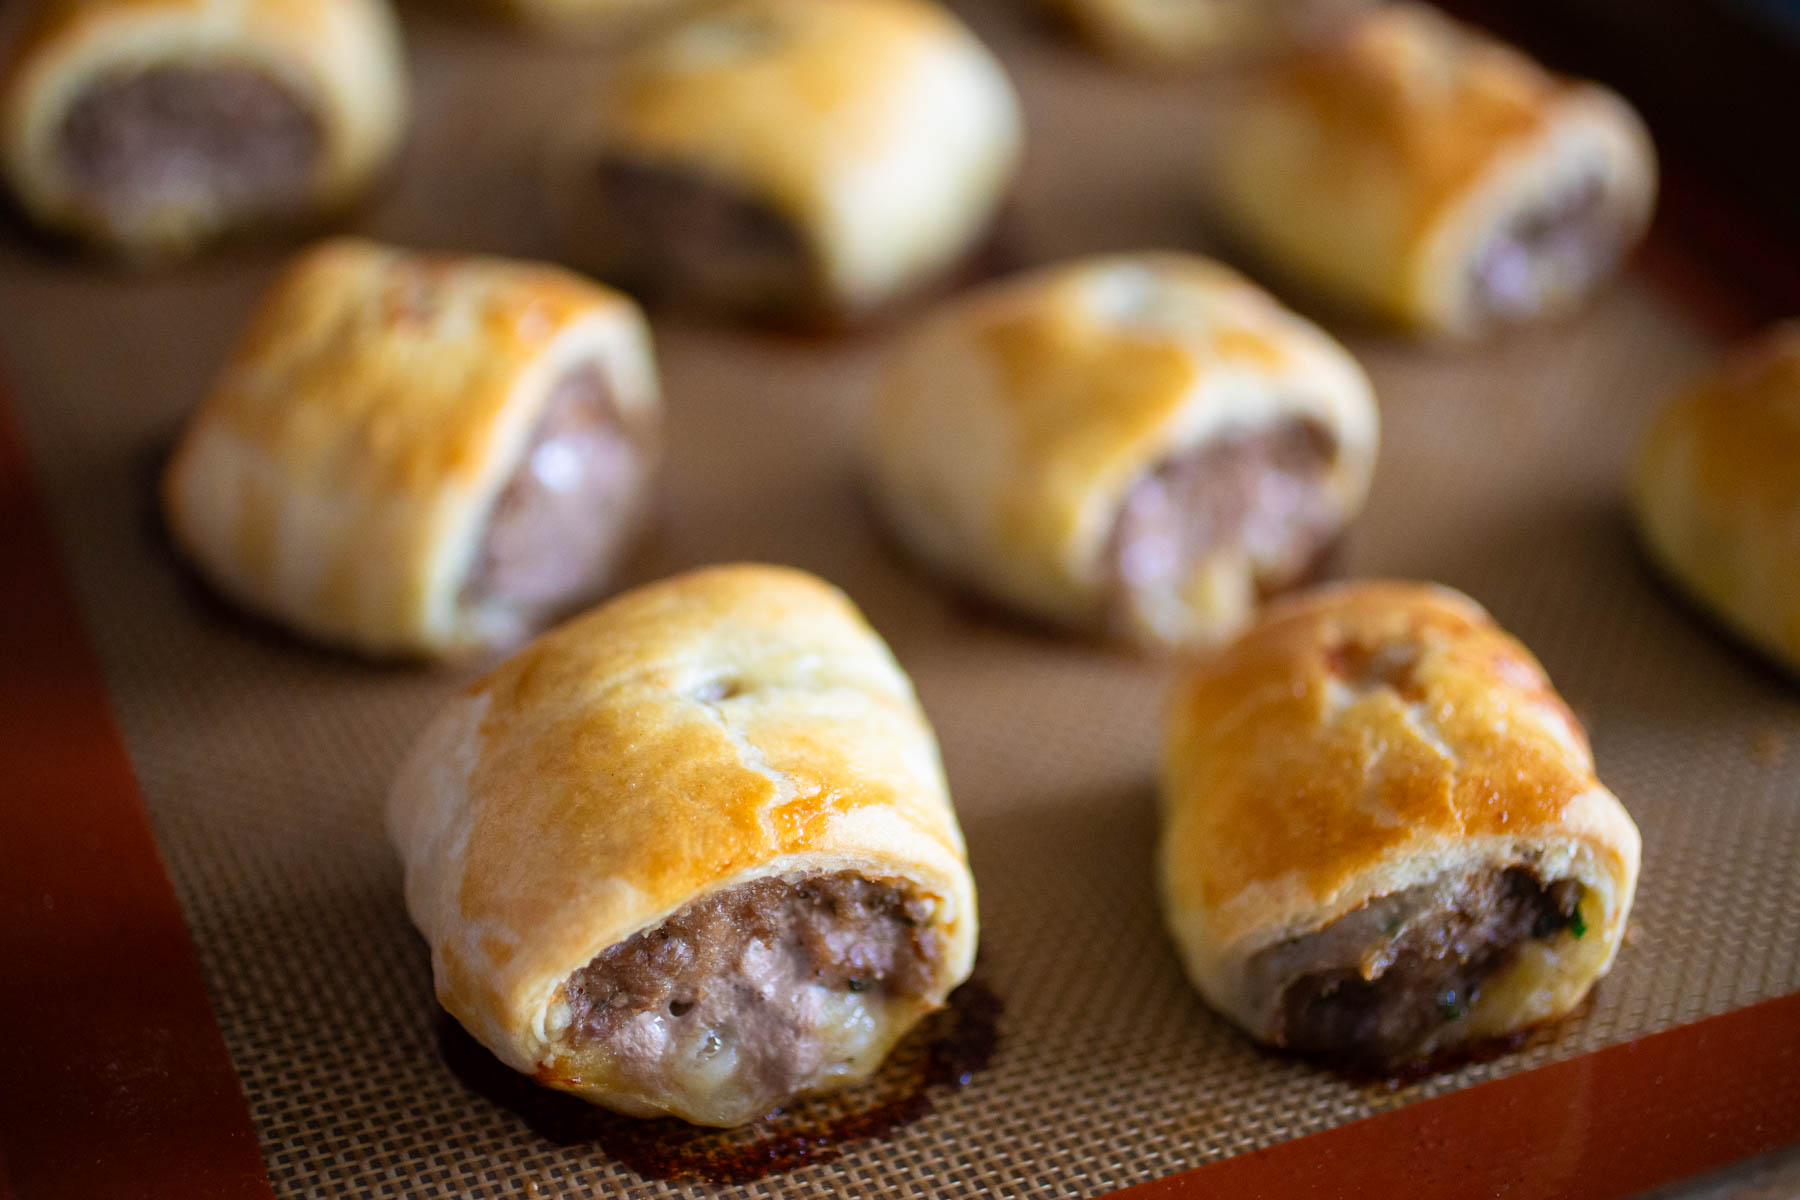 The sausage rolls have a golden brown crust on top.